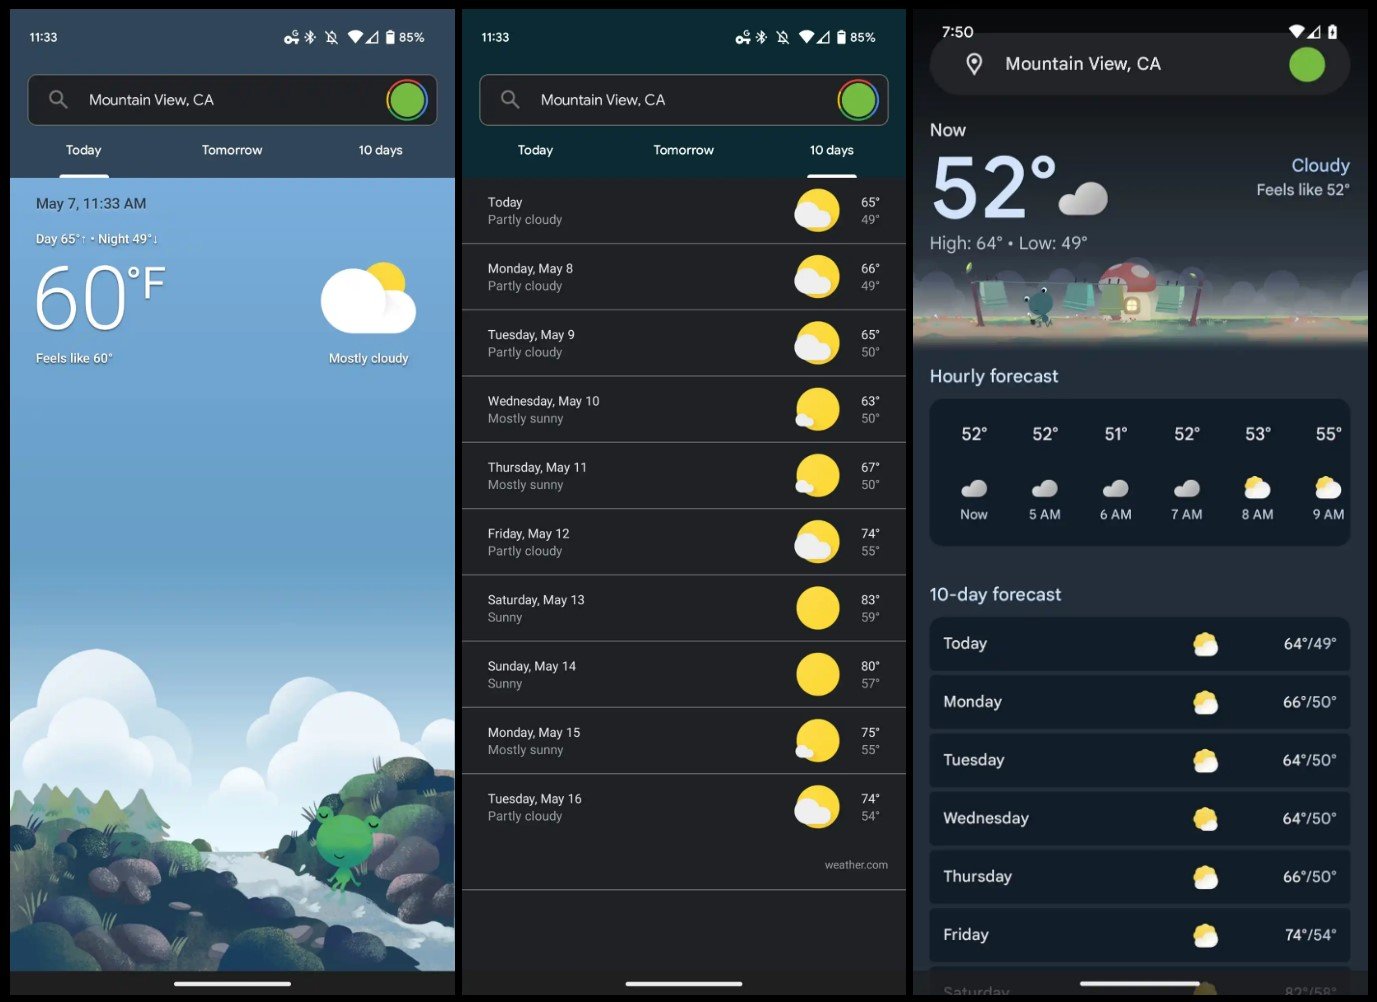 Google is preparing a redesign of the Weather app for Android